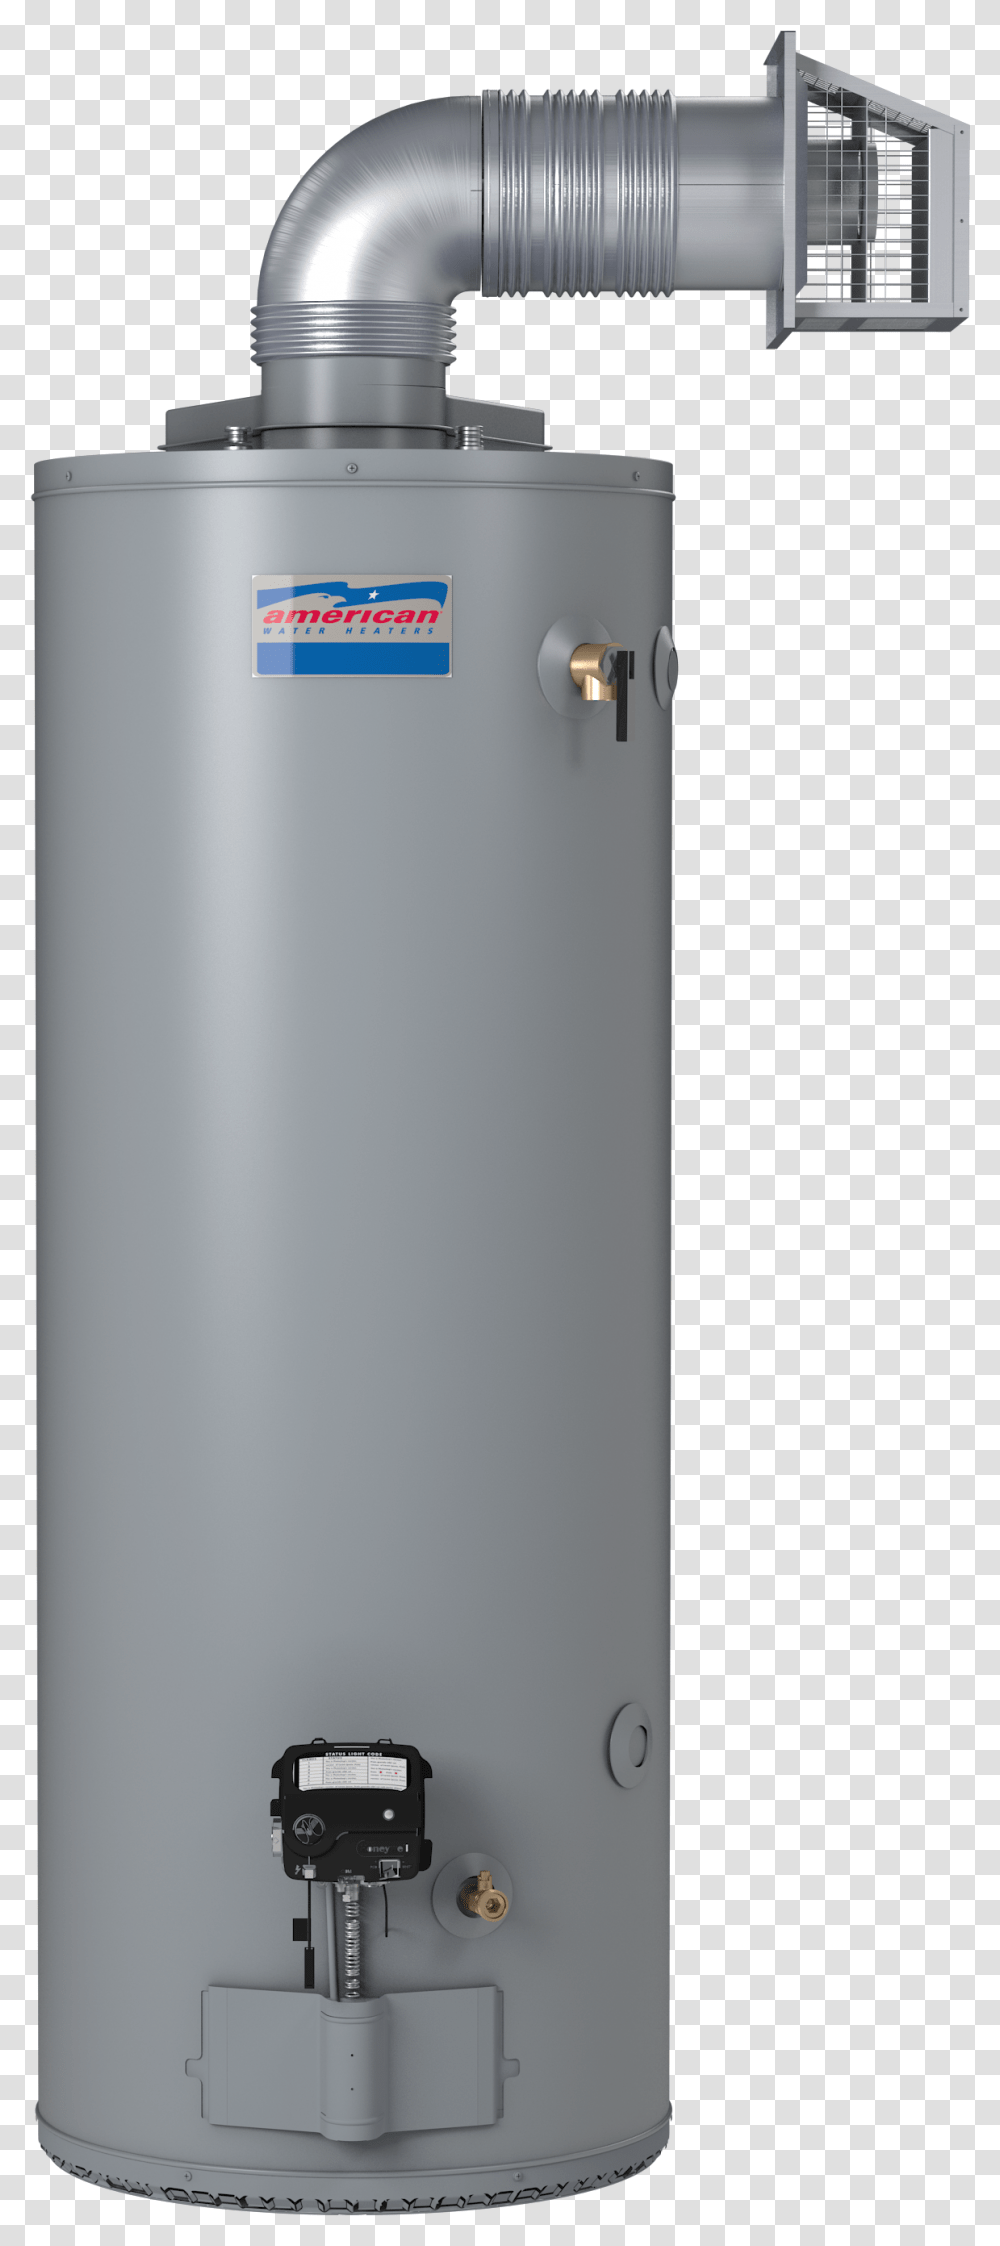 Direct Vent Water Heater Price, Appliance, Shaker, Bottle, Refrigerator Transparent Png